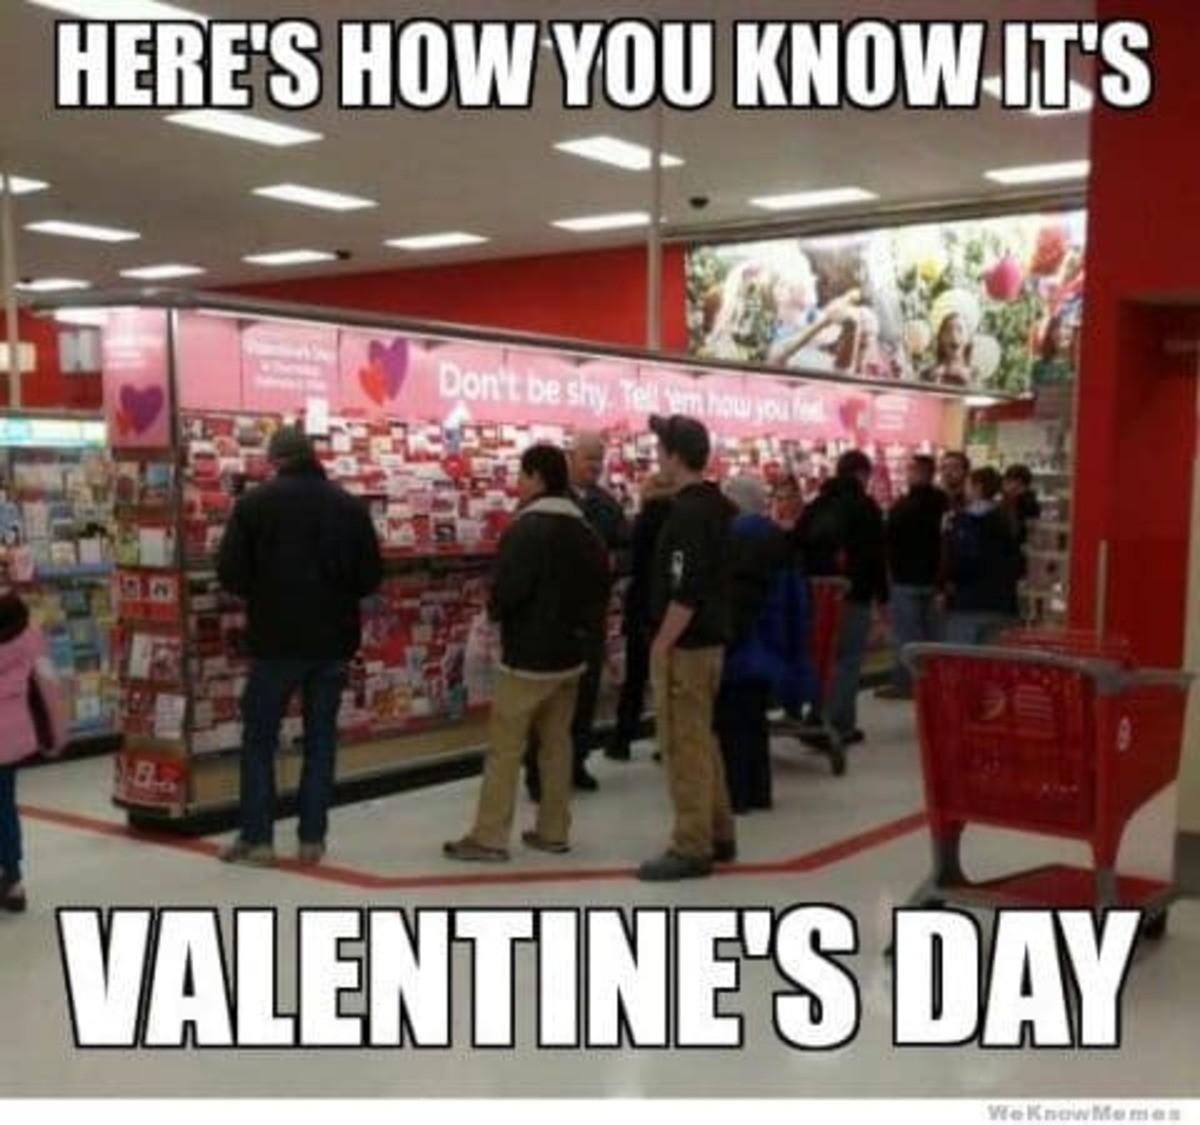 Here’s how you know it’s Valentine‘s day